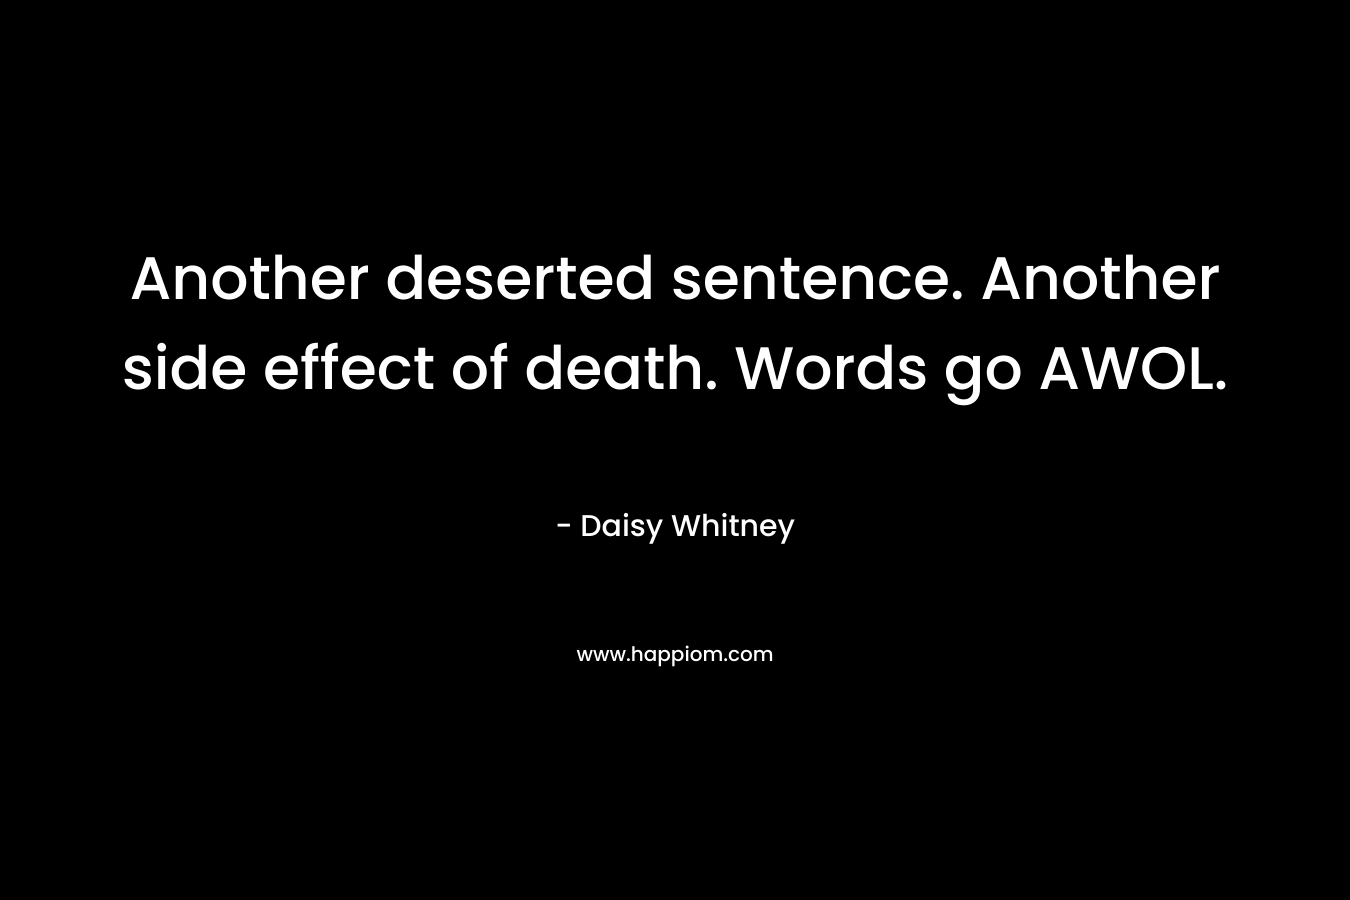 Another deserted sentence. Another side effect of death. Words go AWOL.